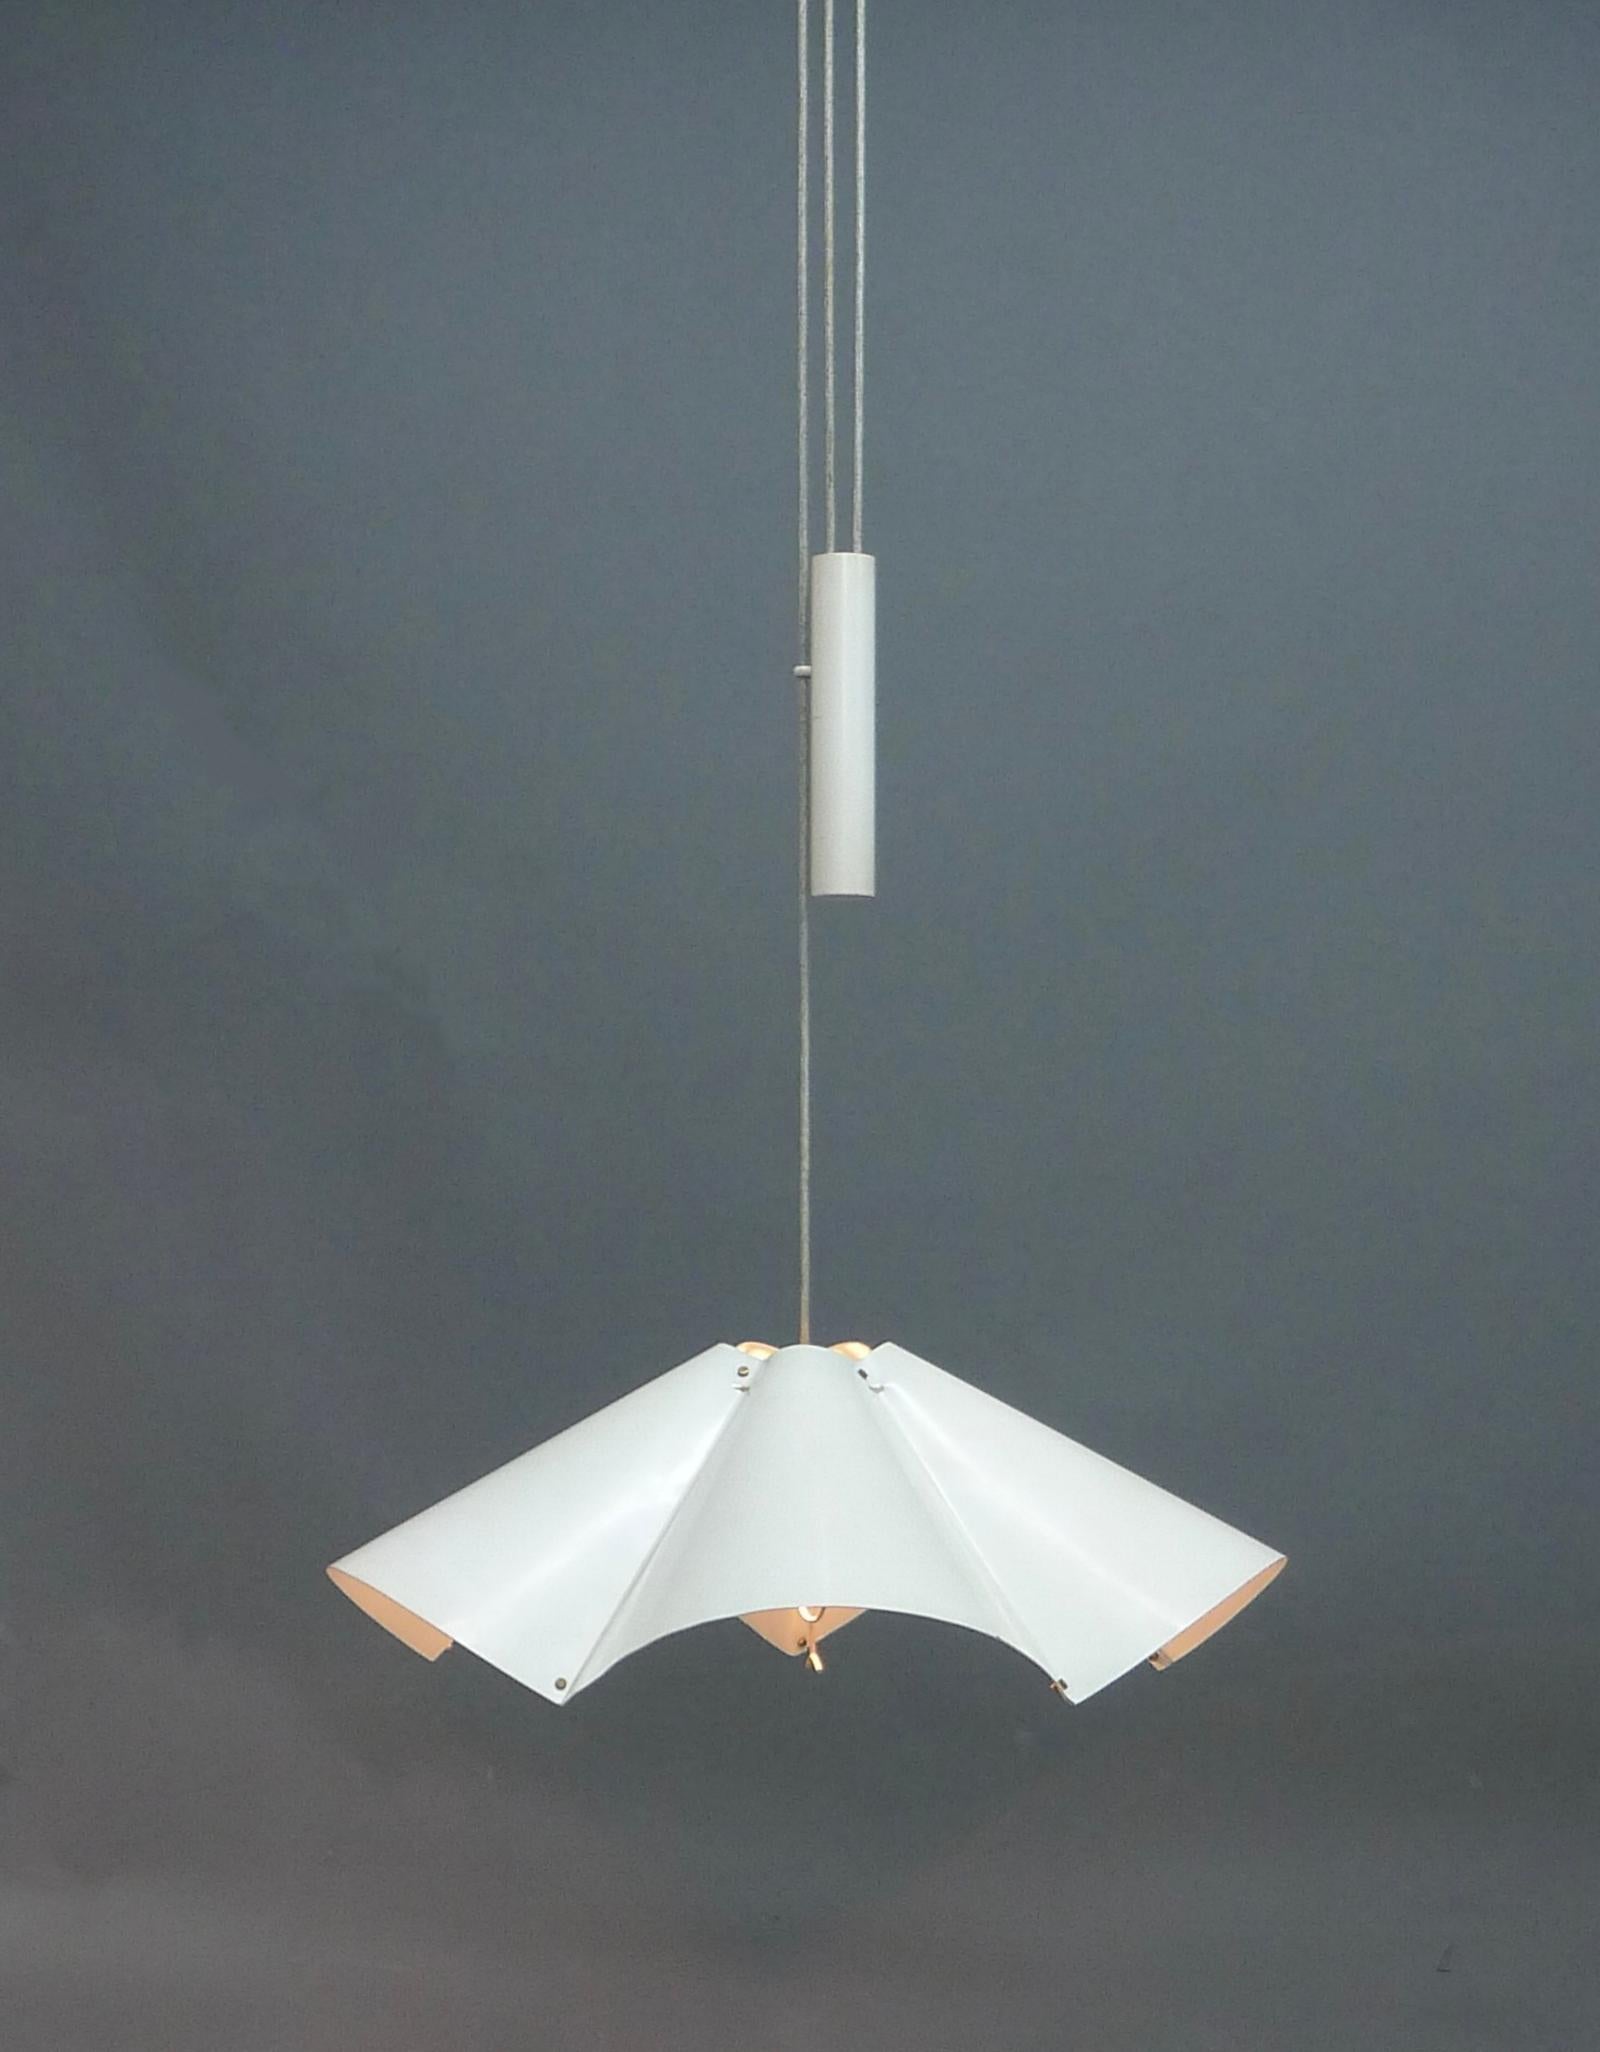 Gino Sarfatti for Arteluce, Rise and Fall Pendant Light, Model 2134, 1950s For Sale 10